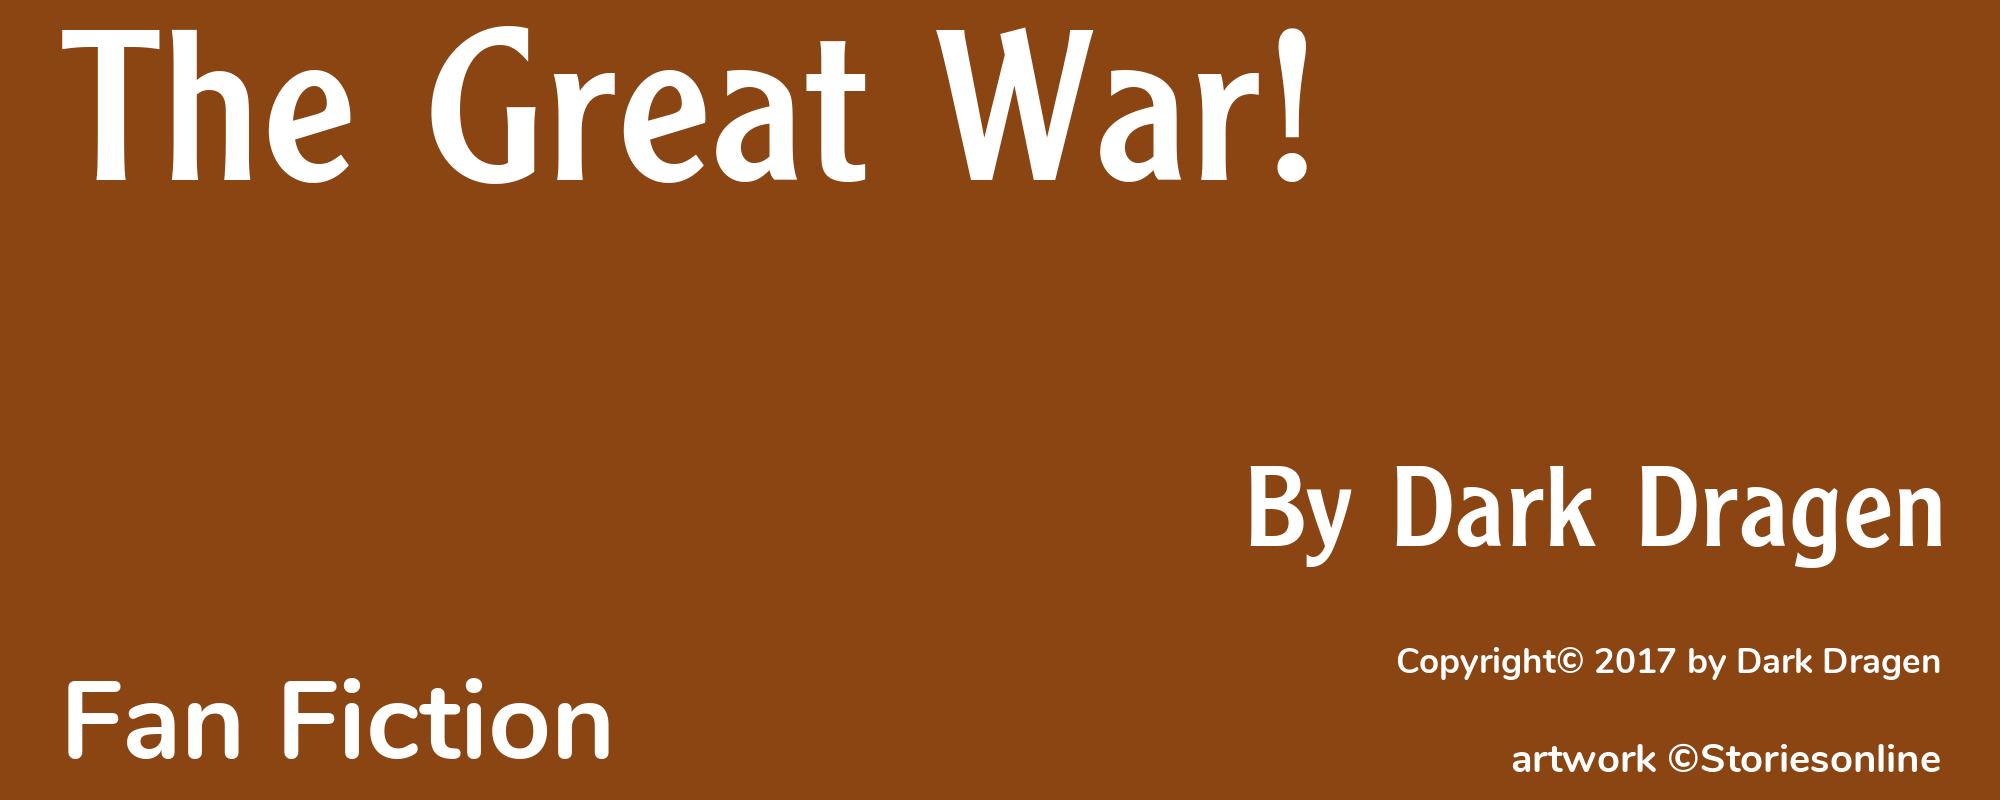 The Great War! - Cover